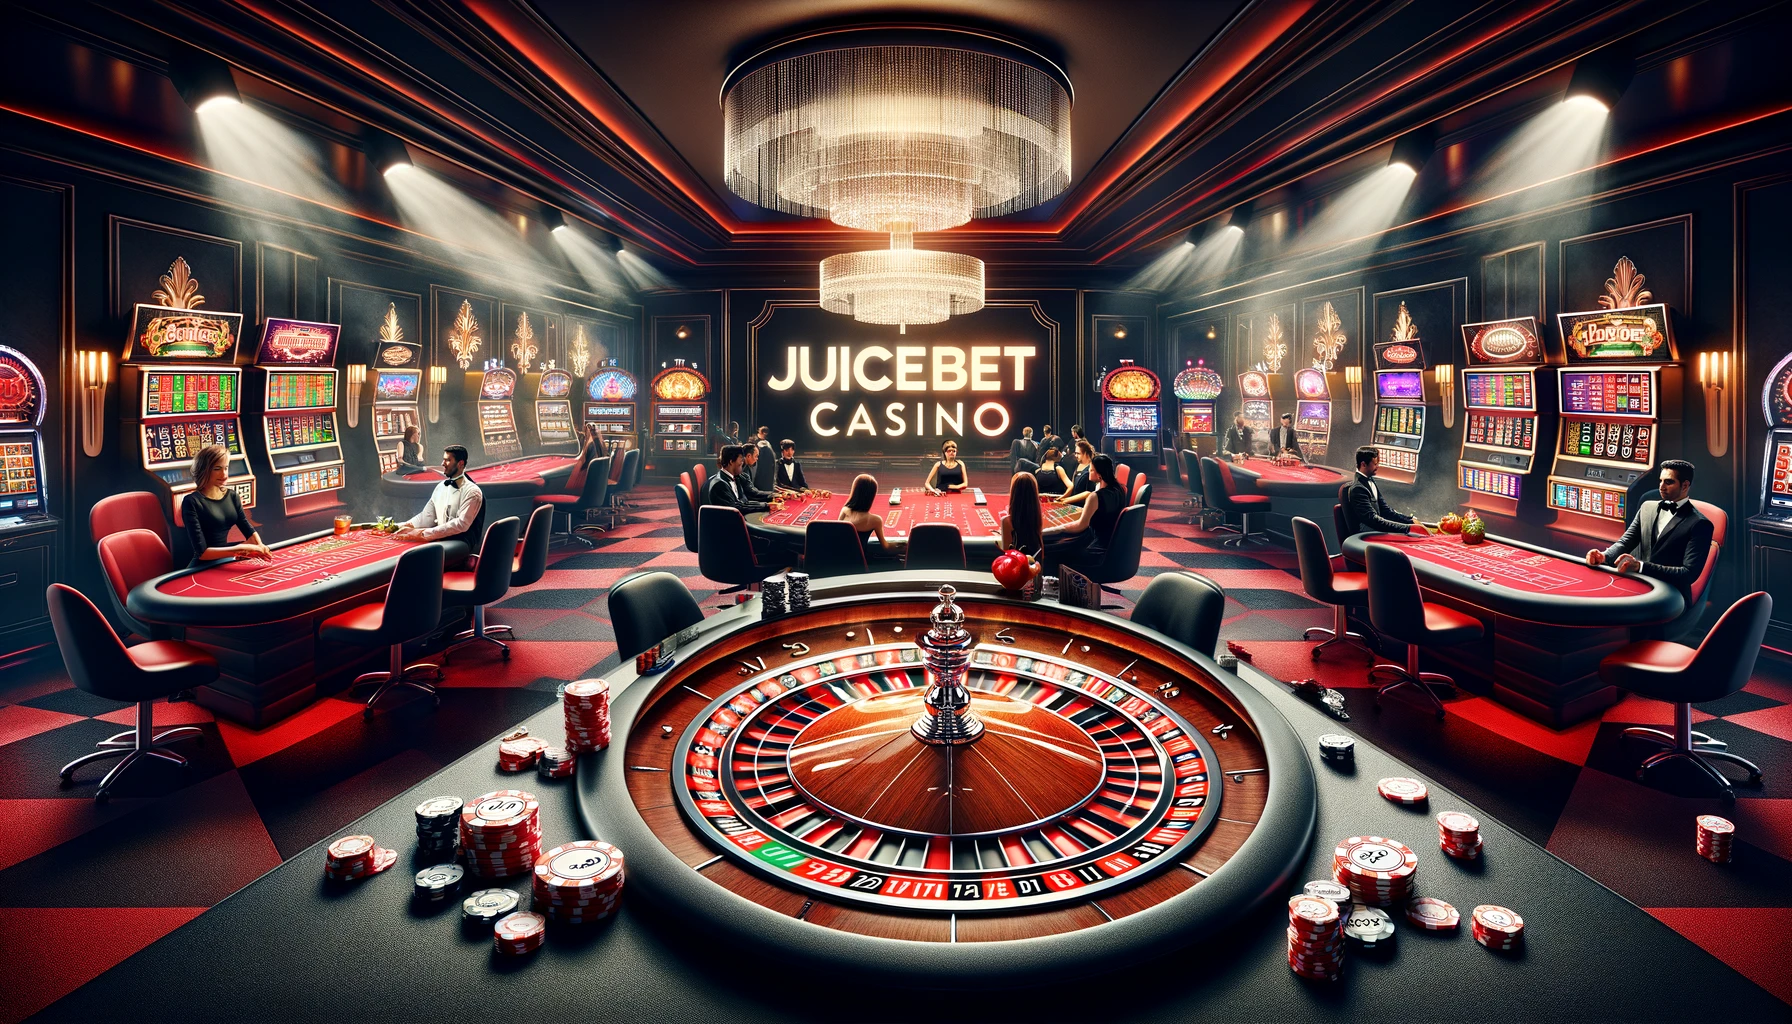 Get ready for excitement at Juicebet Casino: unleash thrilling games and wins! 3